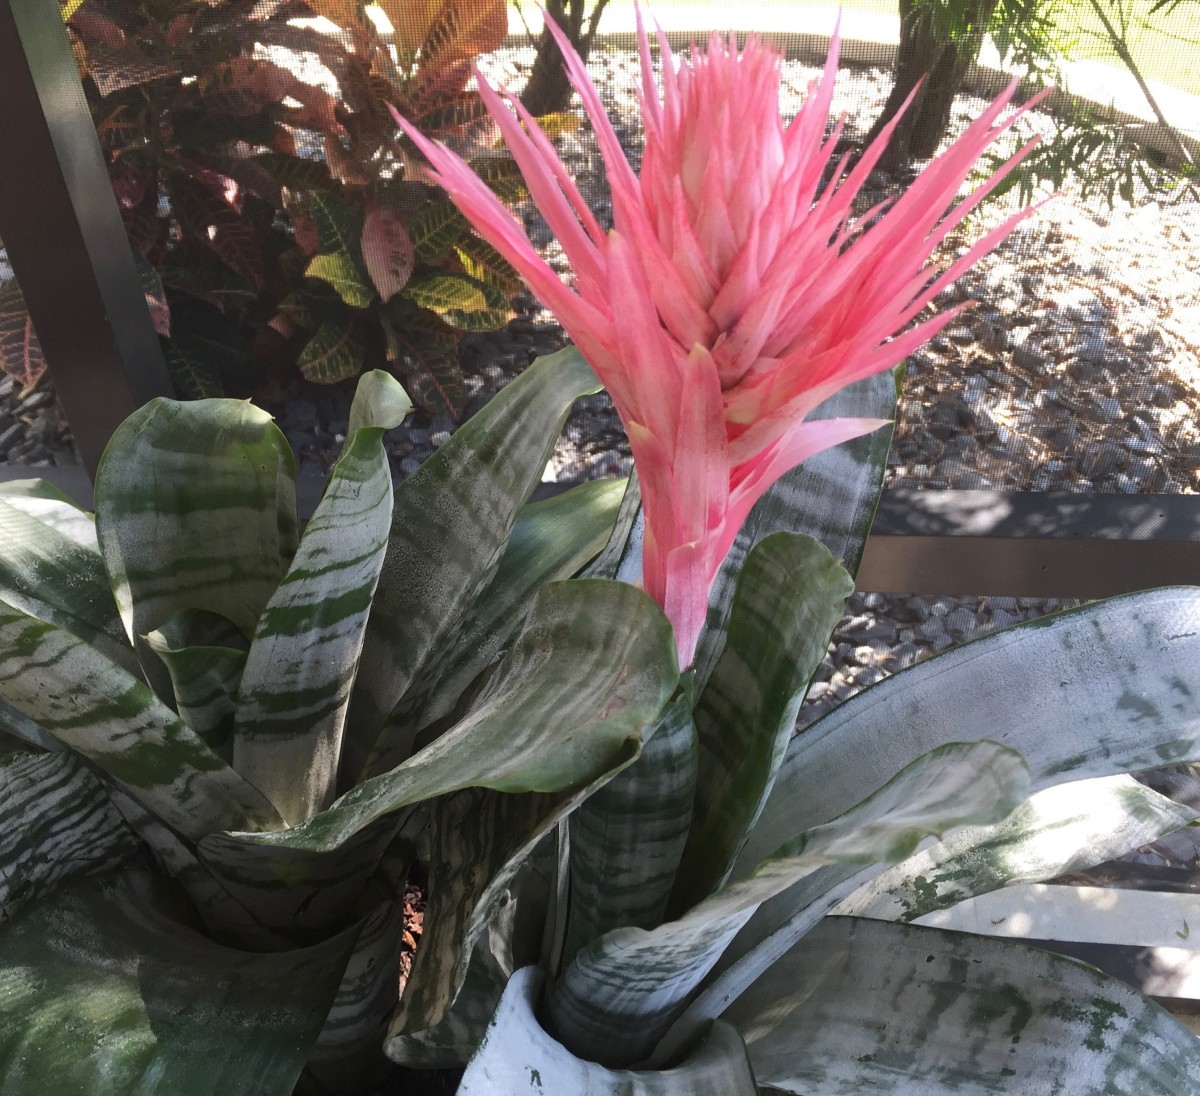 My former neighbor’s pink bromeliad (Aechmea fasciata). My plant came from one of her pups.